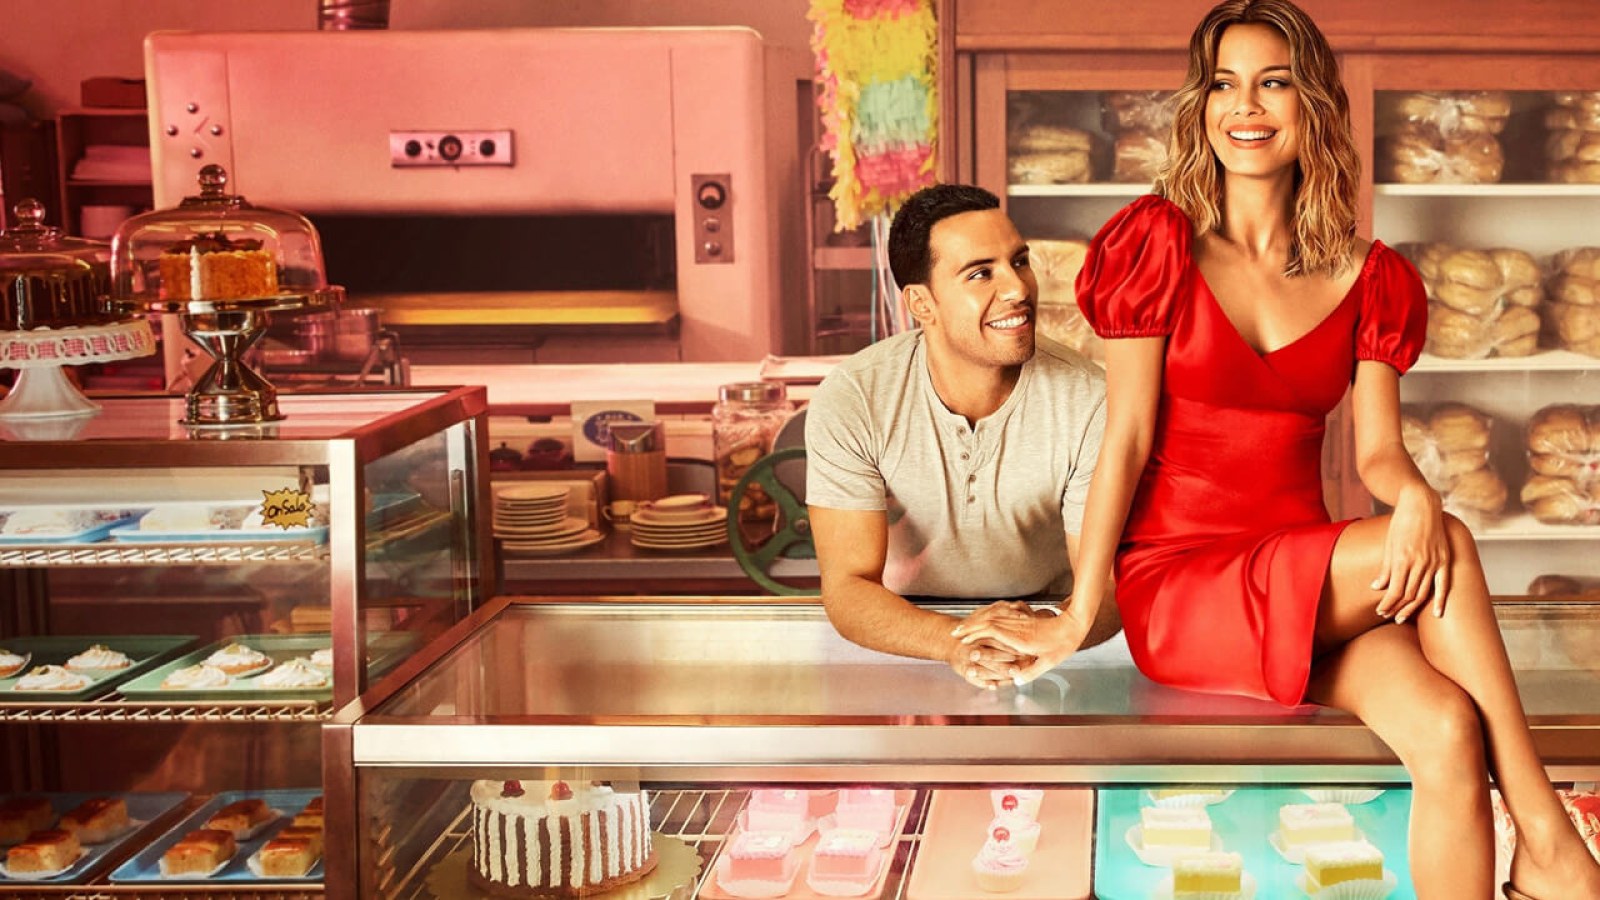 The Beauty and the Baker': Why There Won't Be a Season 2 on Netflix